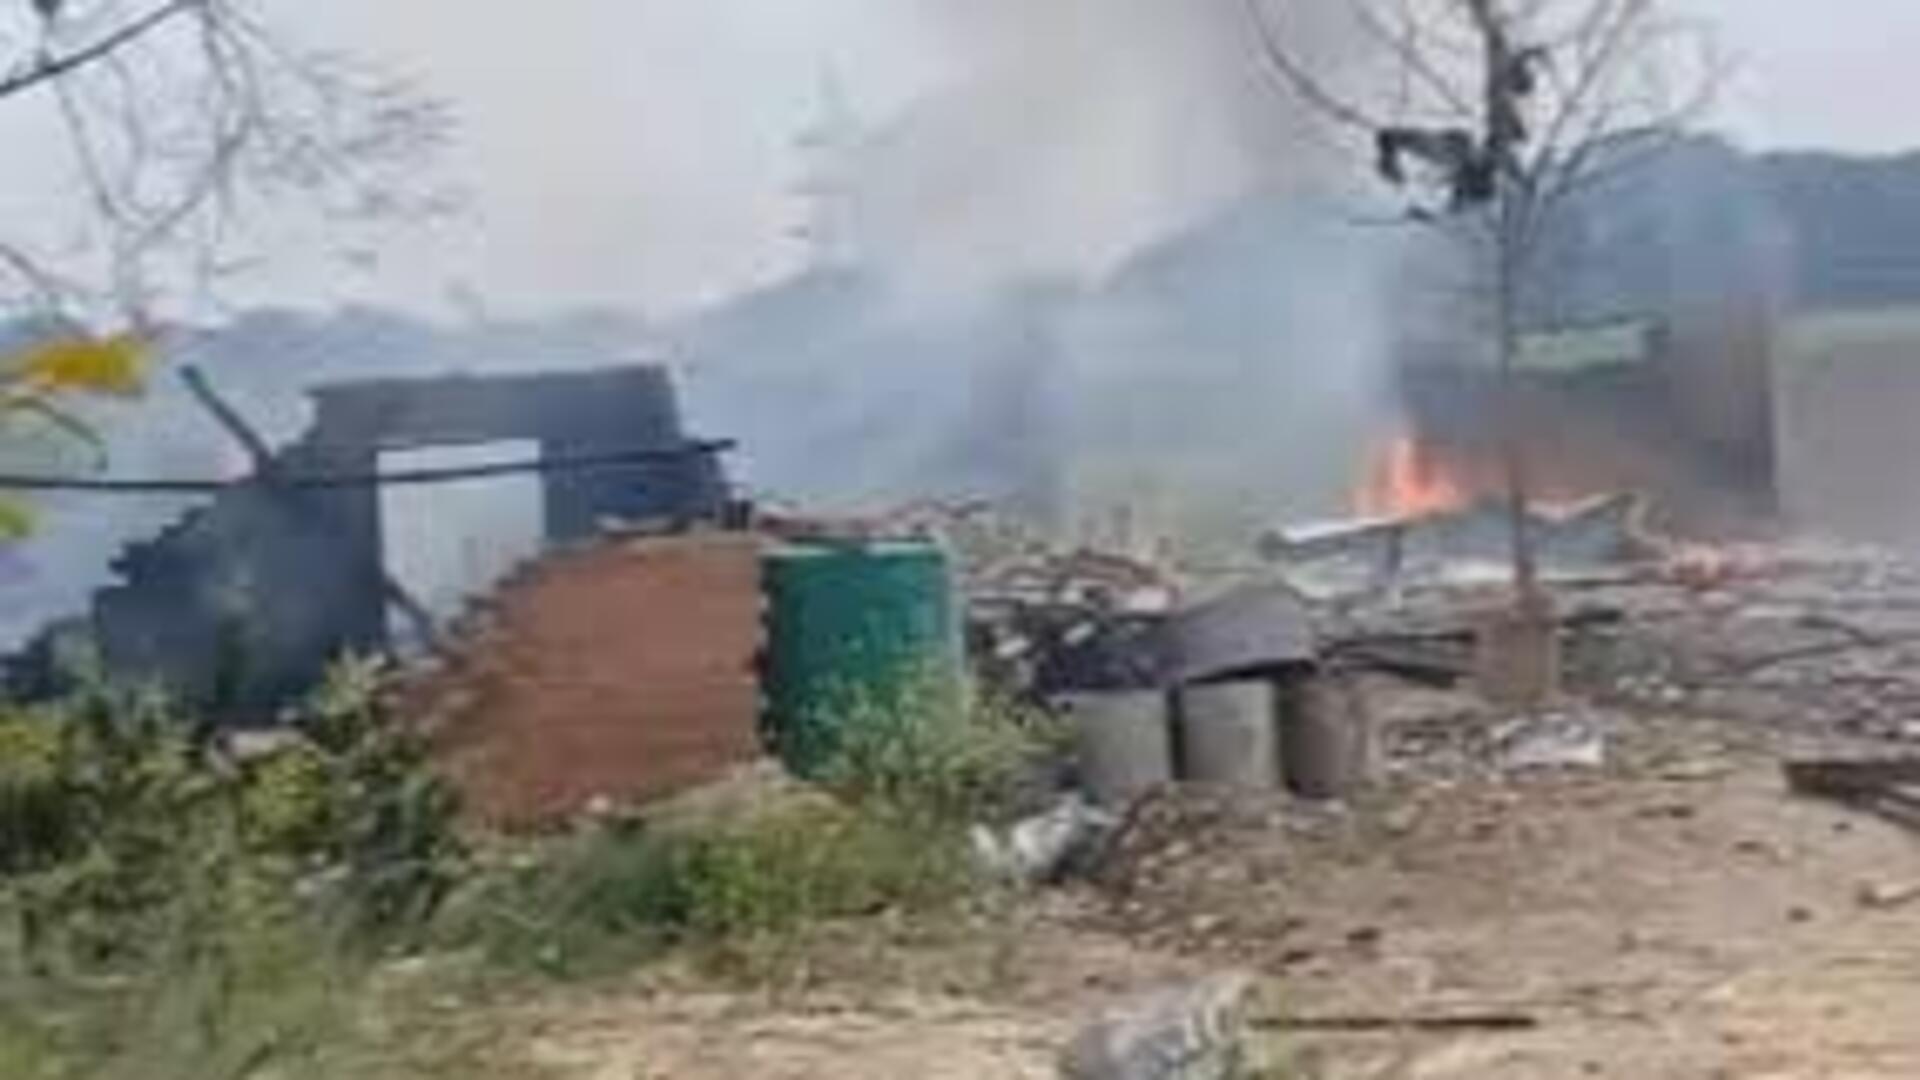 Explosion at a Firecracker Factory in Kaushambi